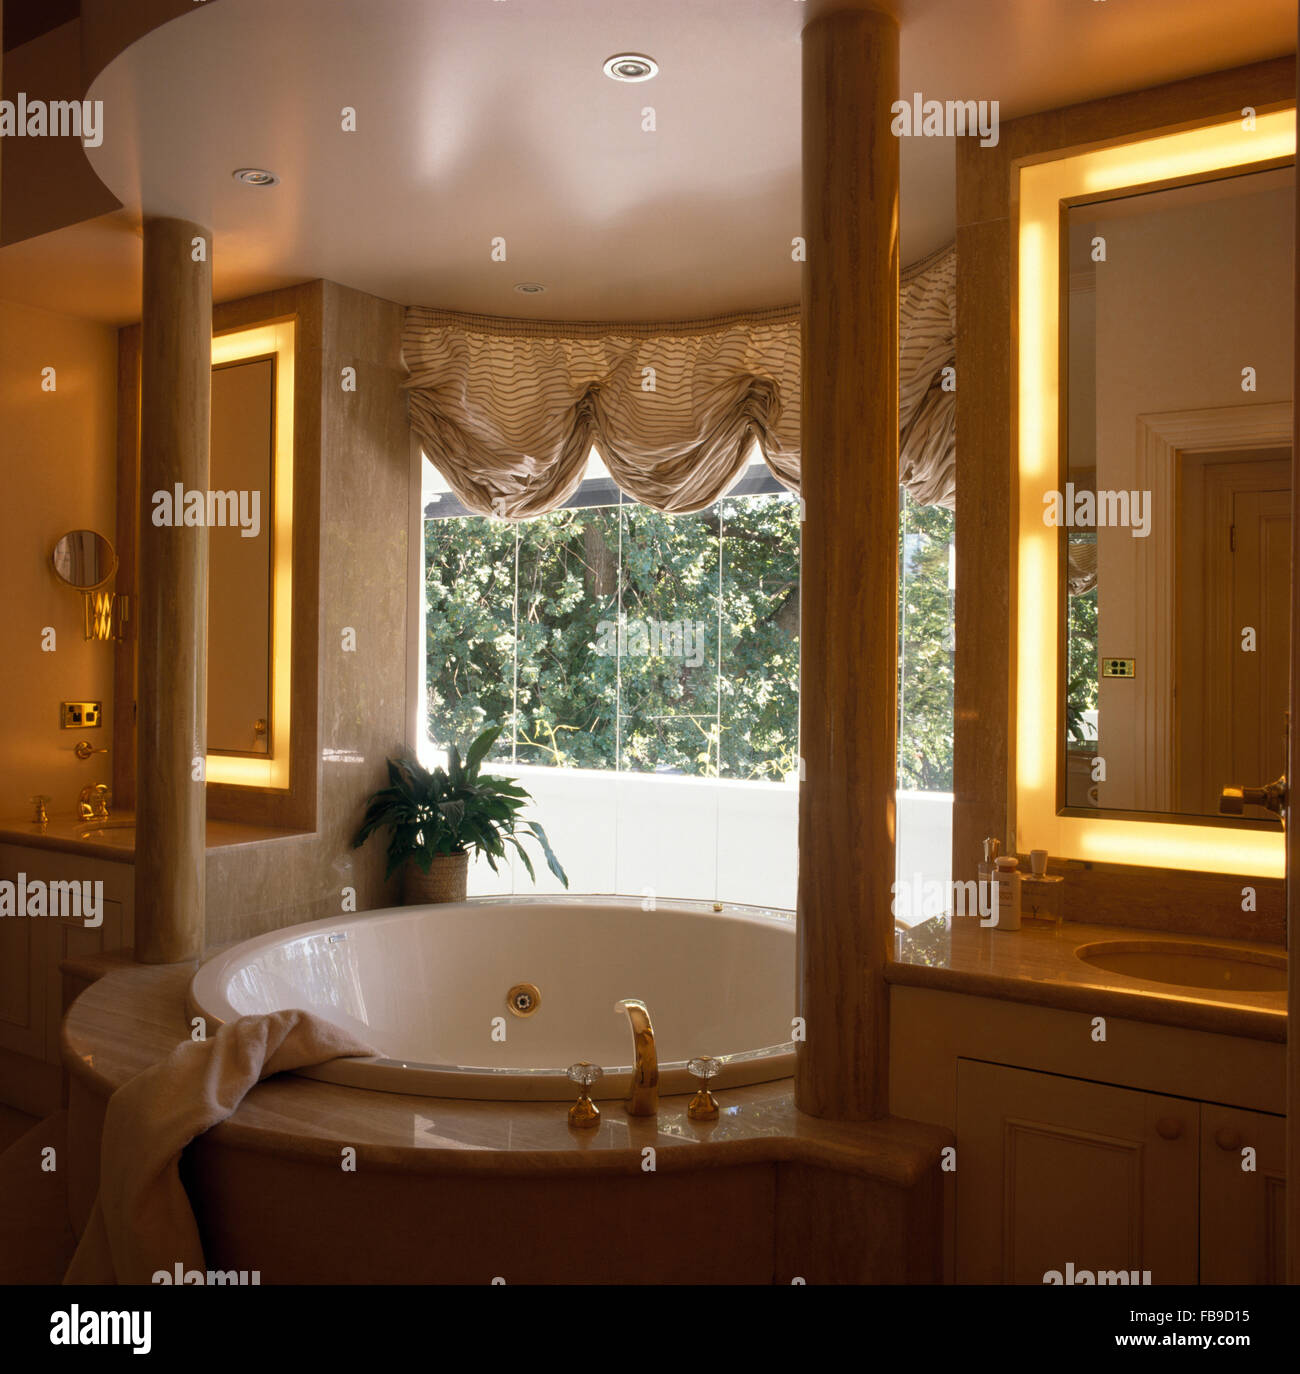 Striped festoon blind above spa bath in nineties bathroom with integral lighting on mirrors Stock Photo